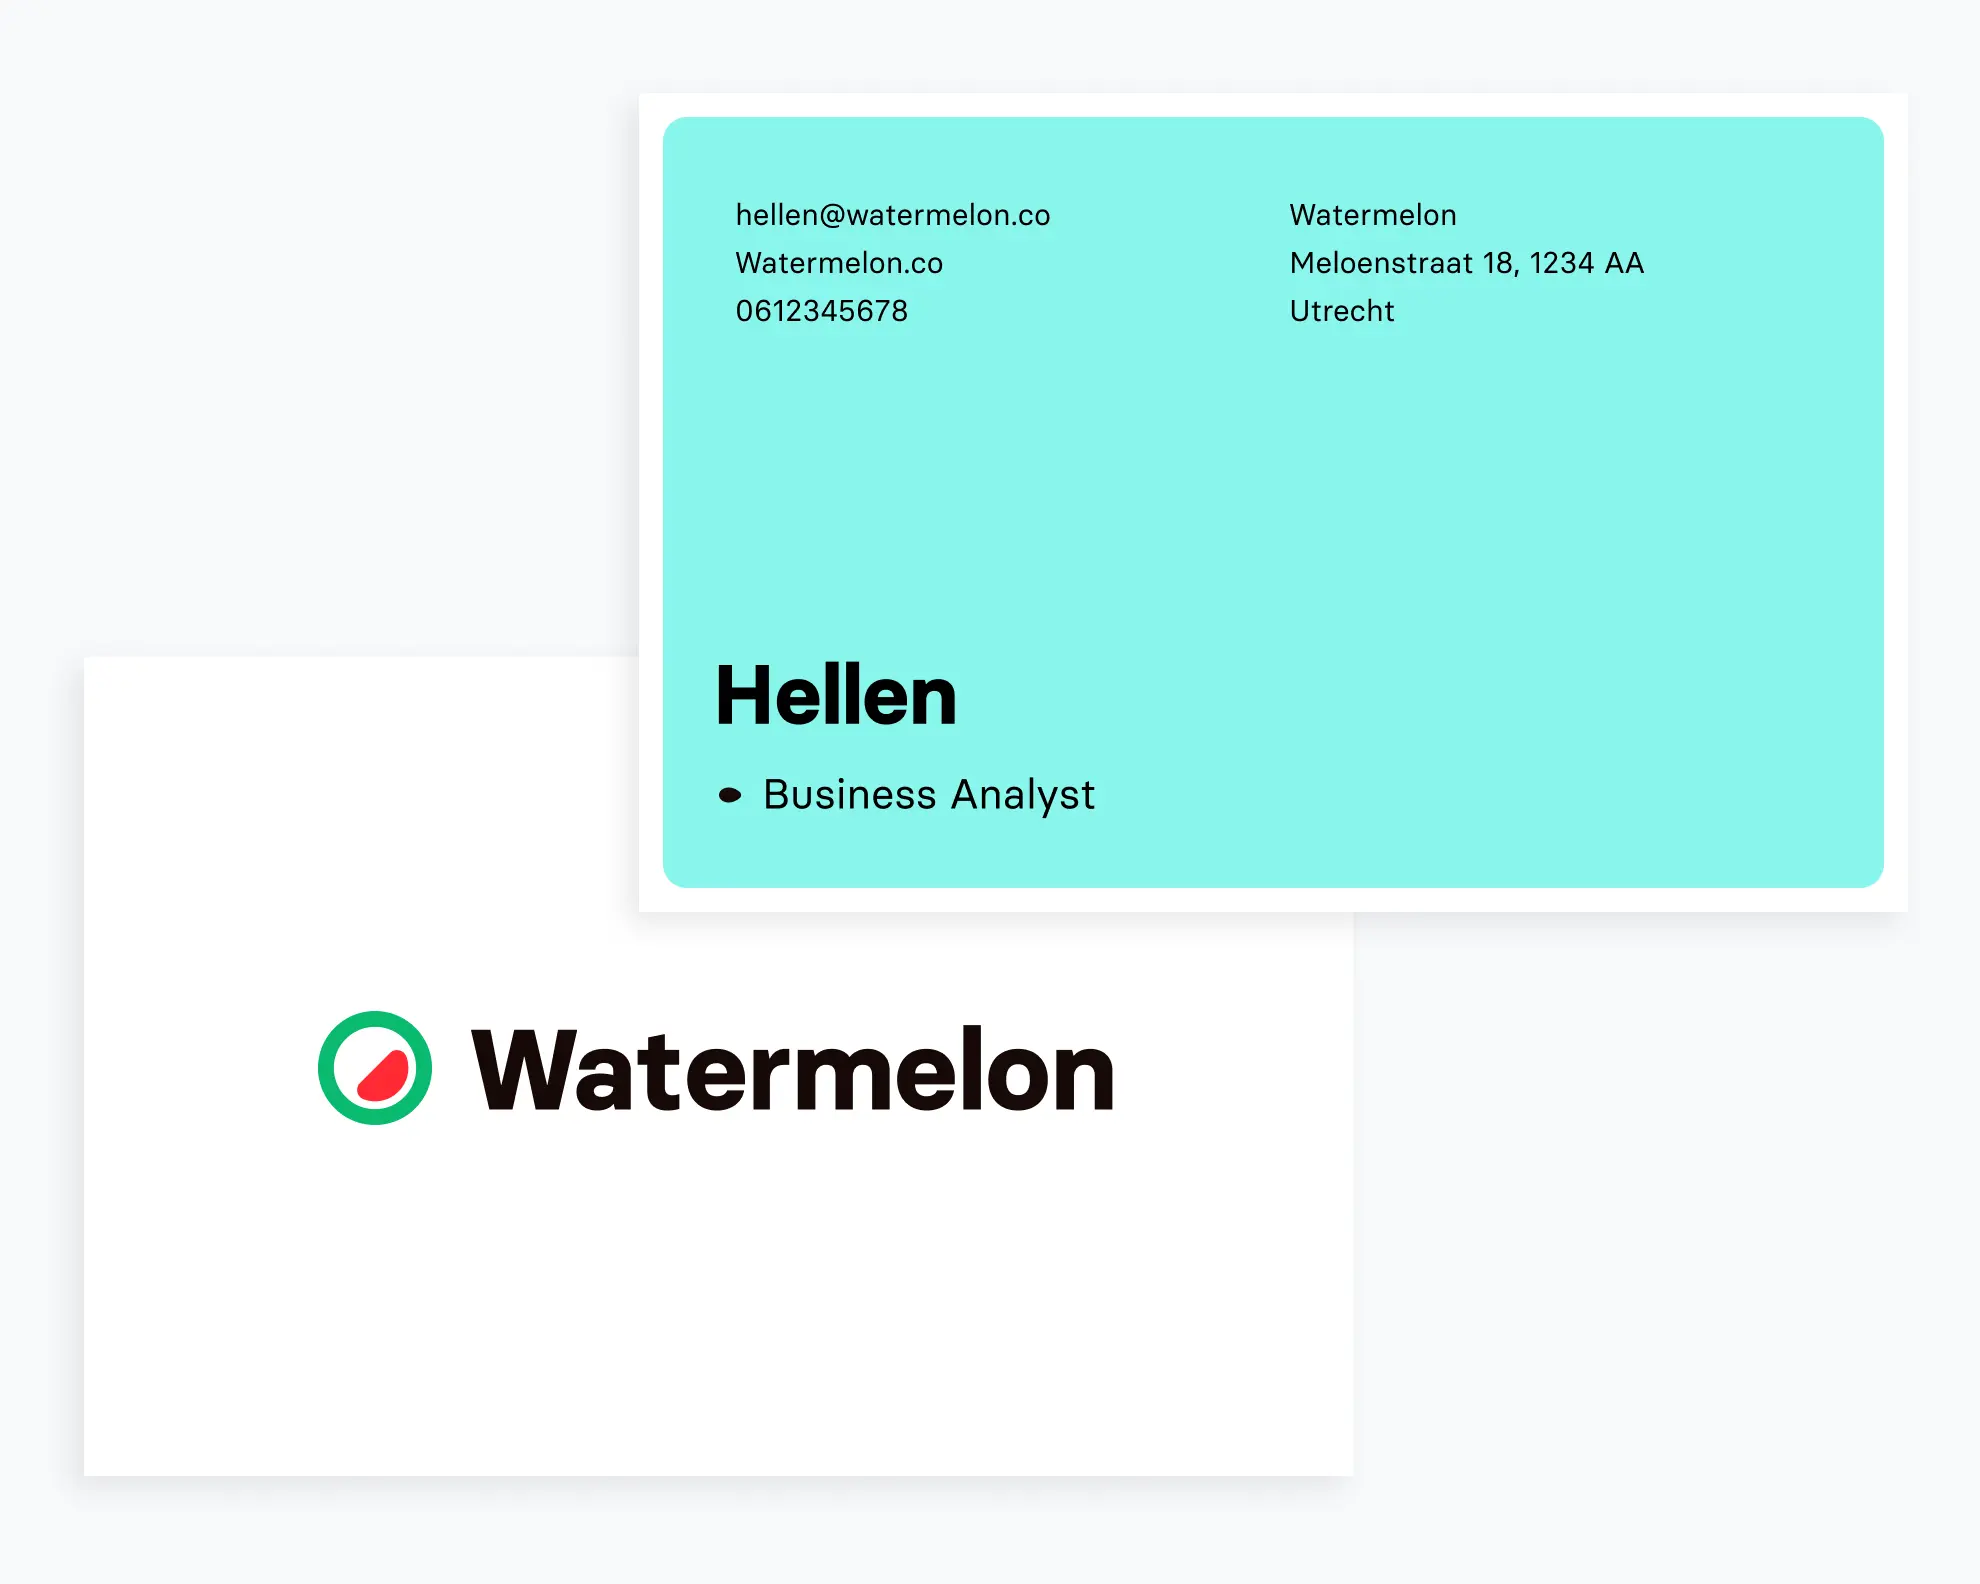 Watermelon Business Cards